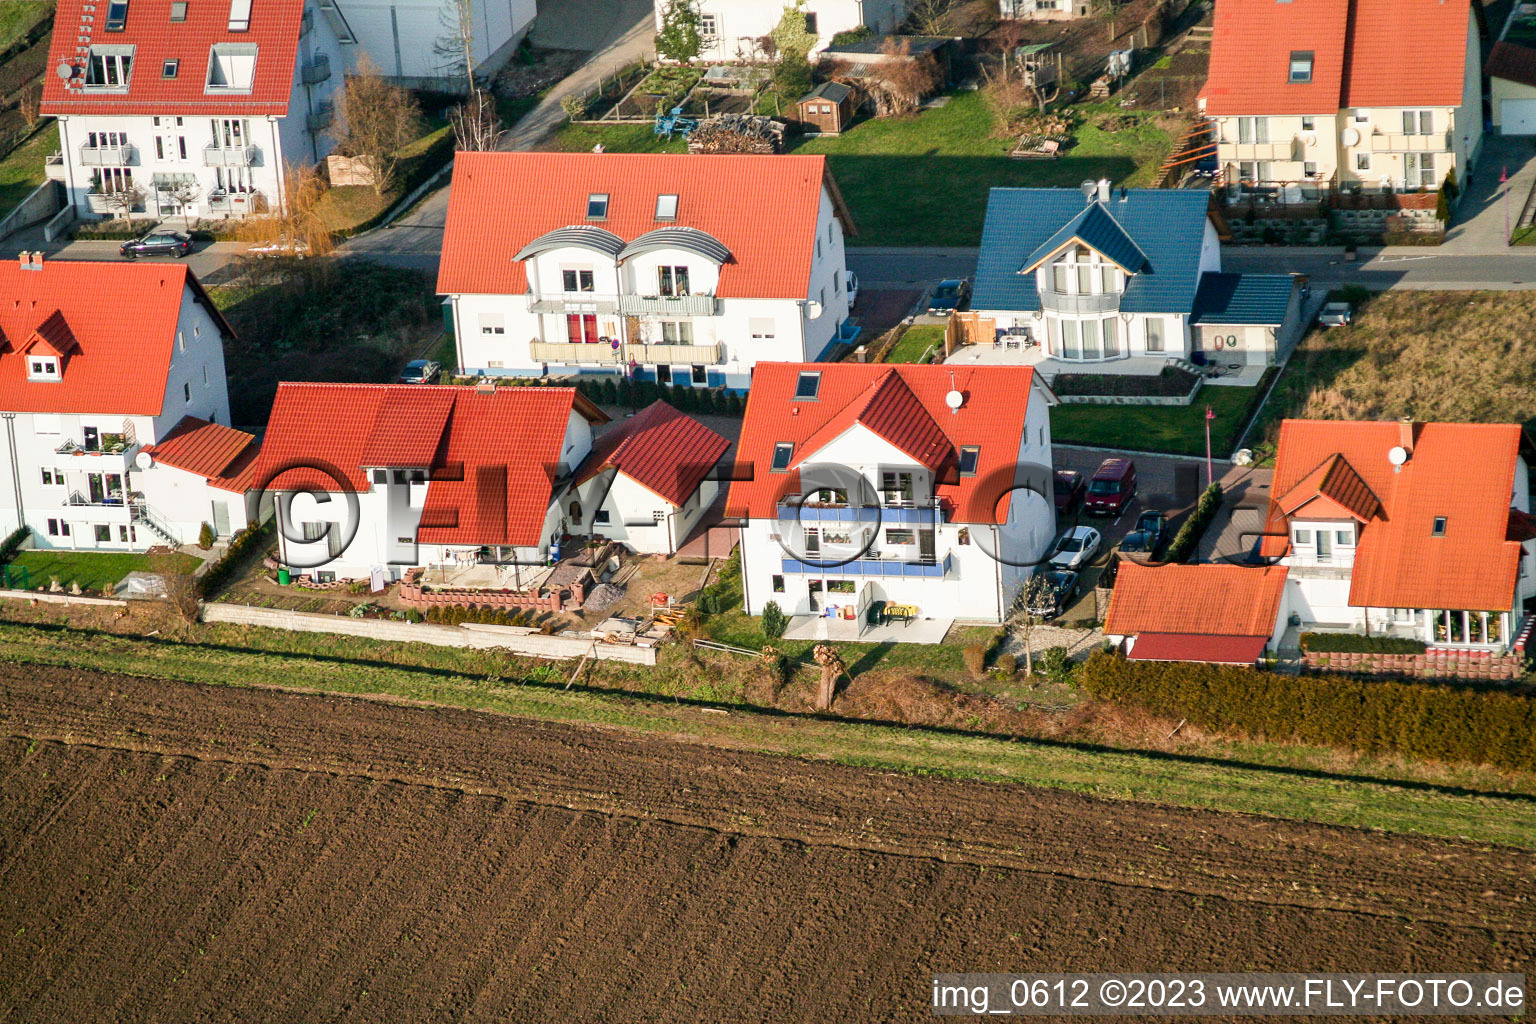 Aerial photograpy of Hare catching in Freckenfeld in the state Rhineland-Palatinate, Germany